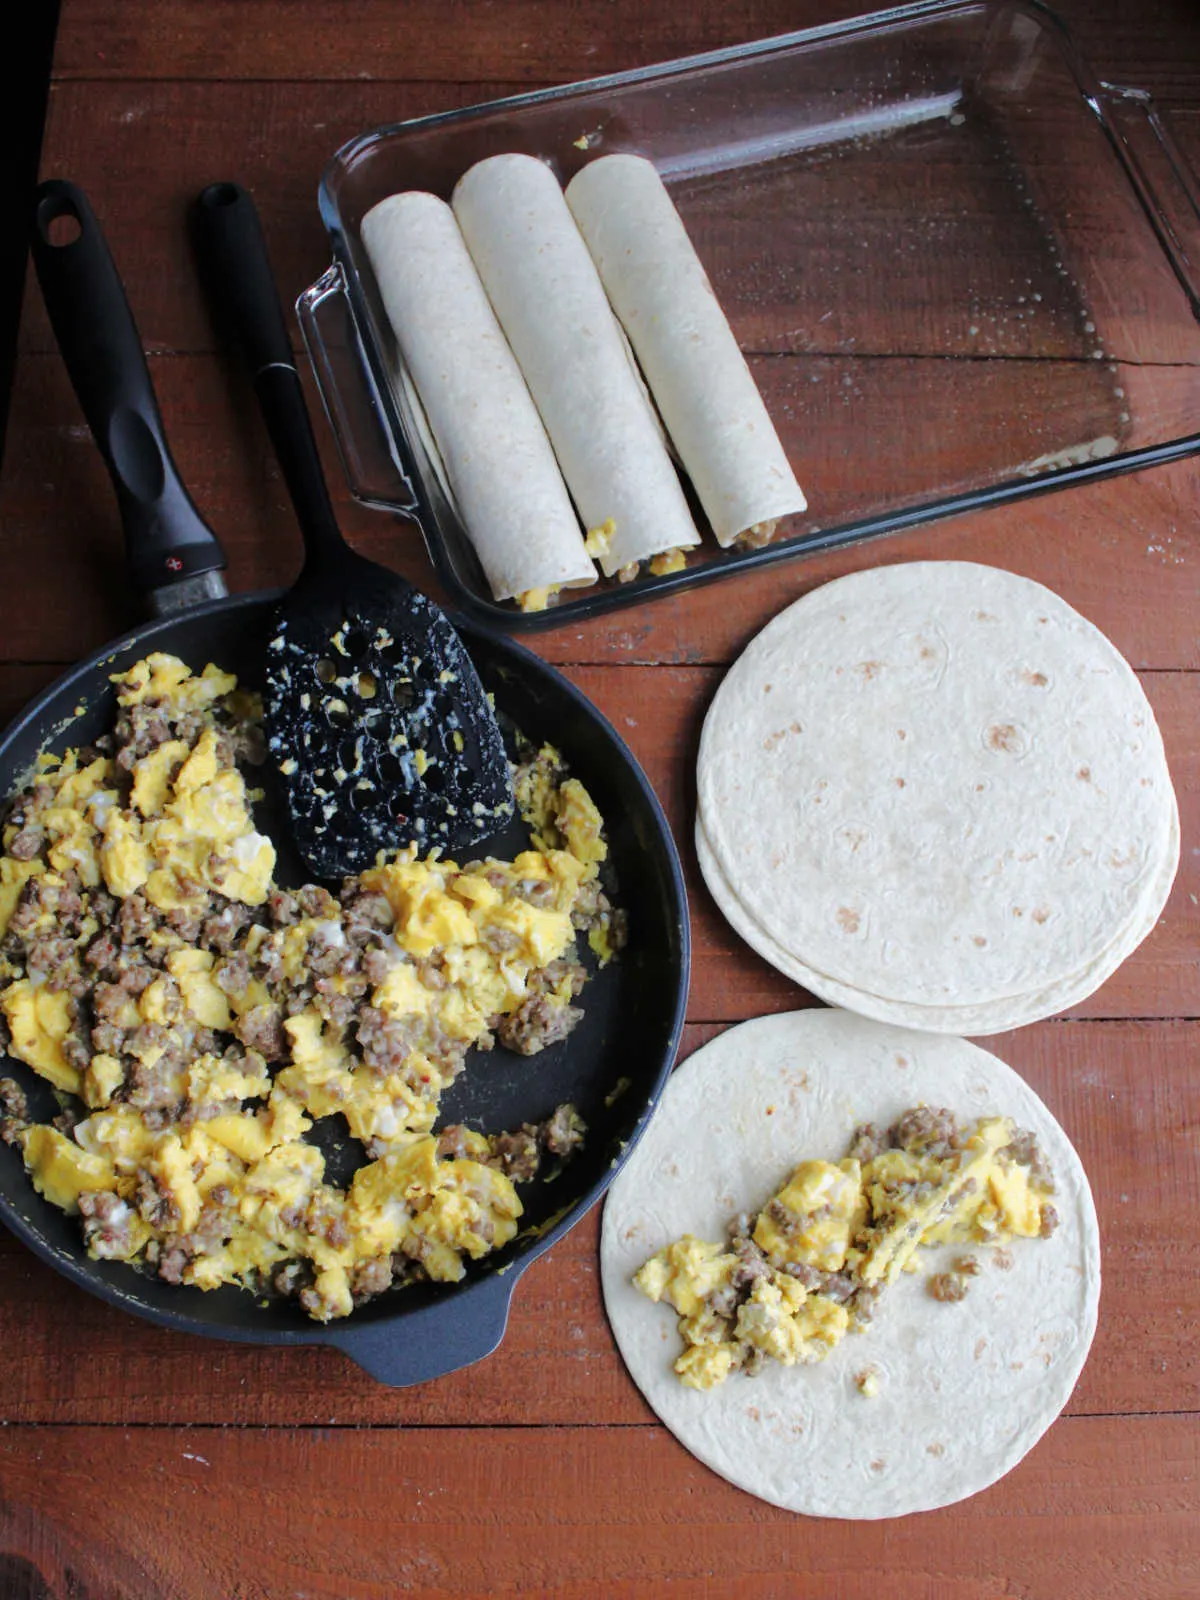 Skillet with sausage and egg mixture next to pile of tortillas, one with some sausage and eggs on it and some enchiladas in a baking dish nearby showing how to fill the tortillas and roll them up.